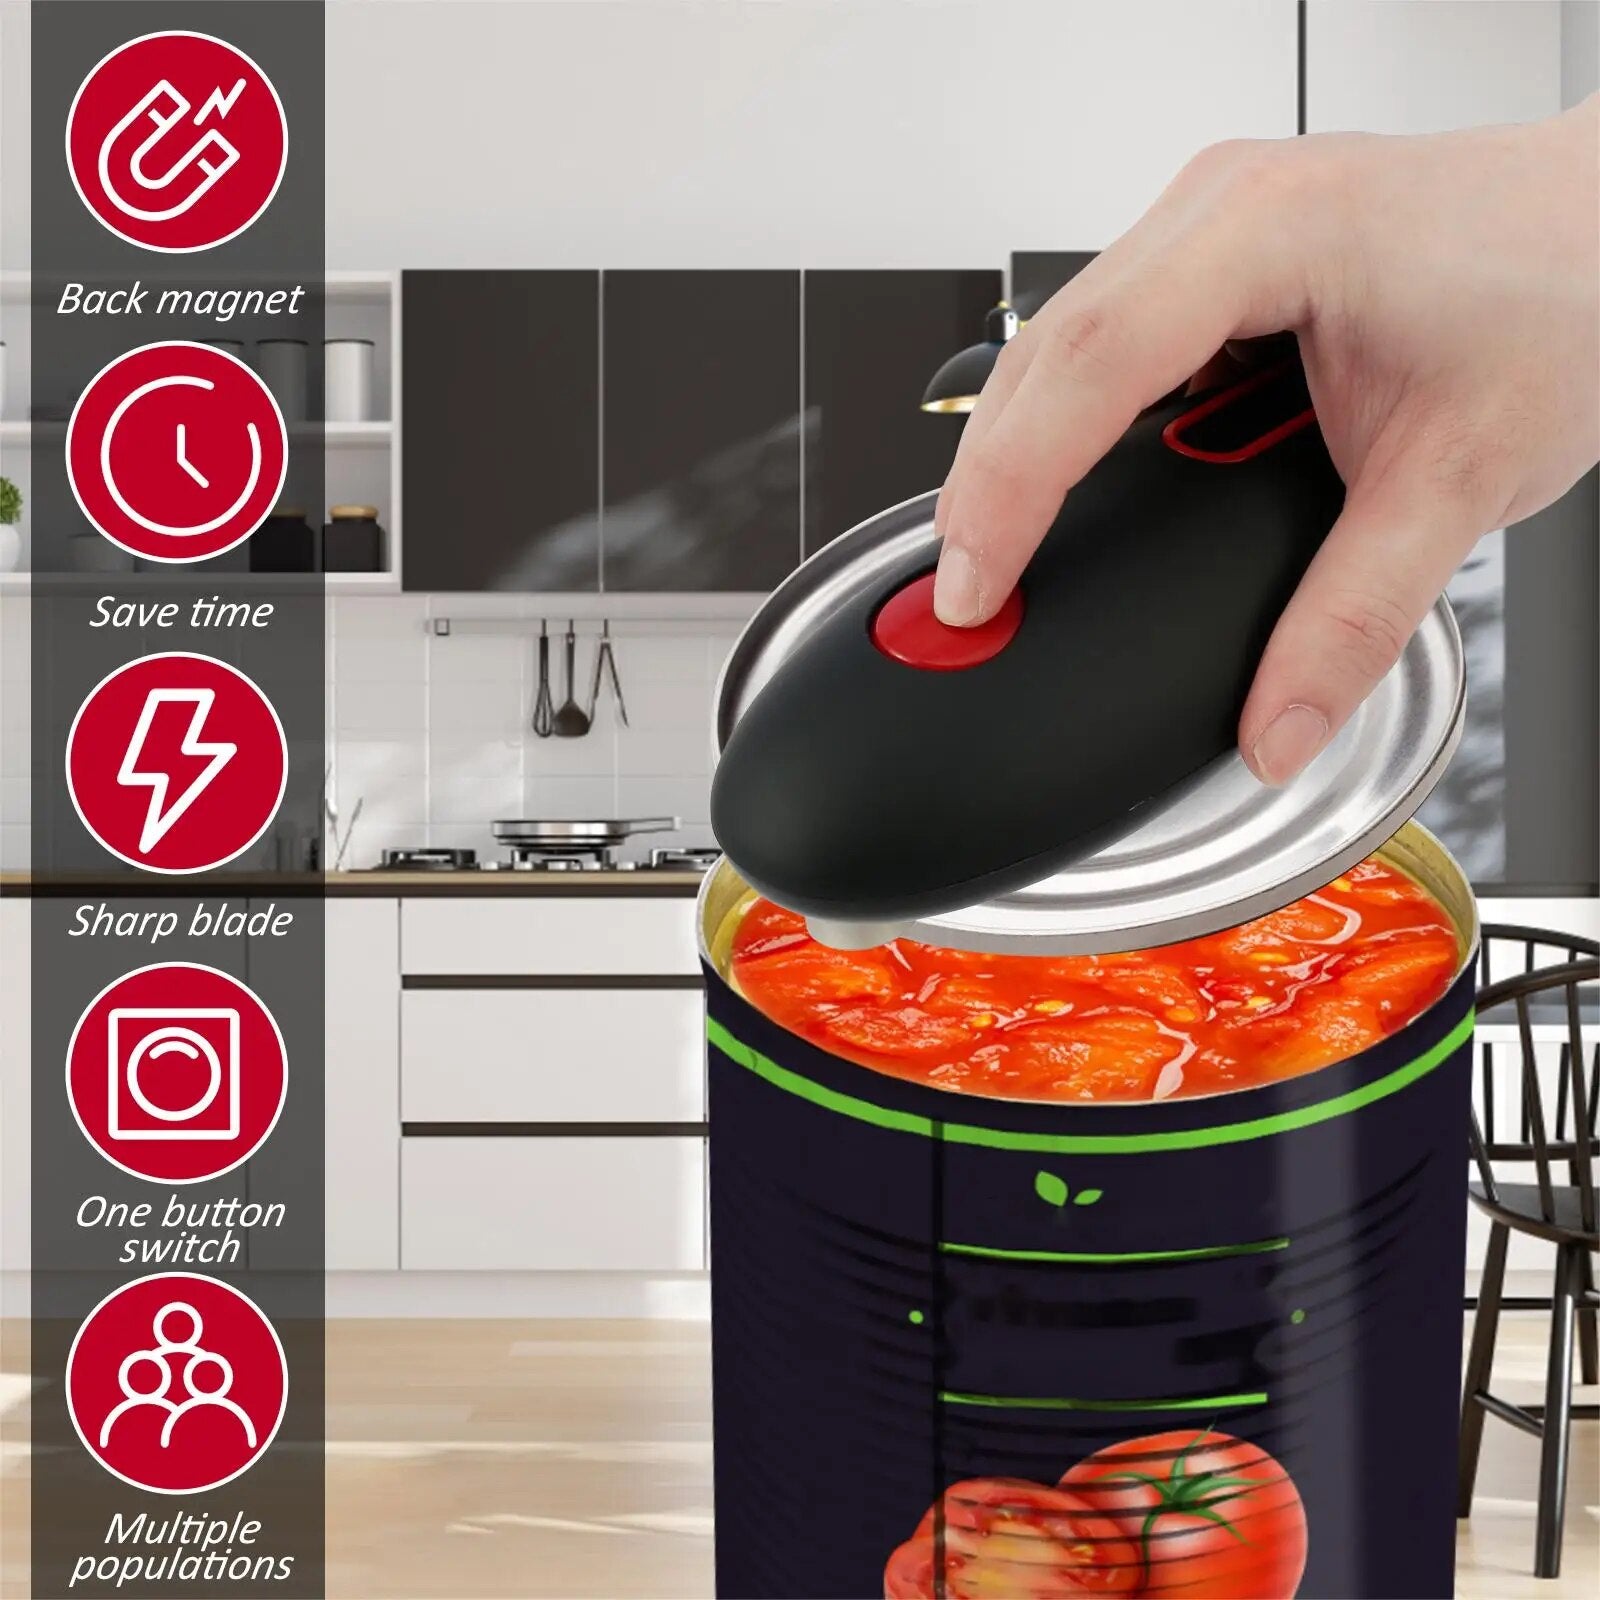 Electric Can Opener - One Touch Safe Operation